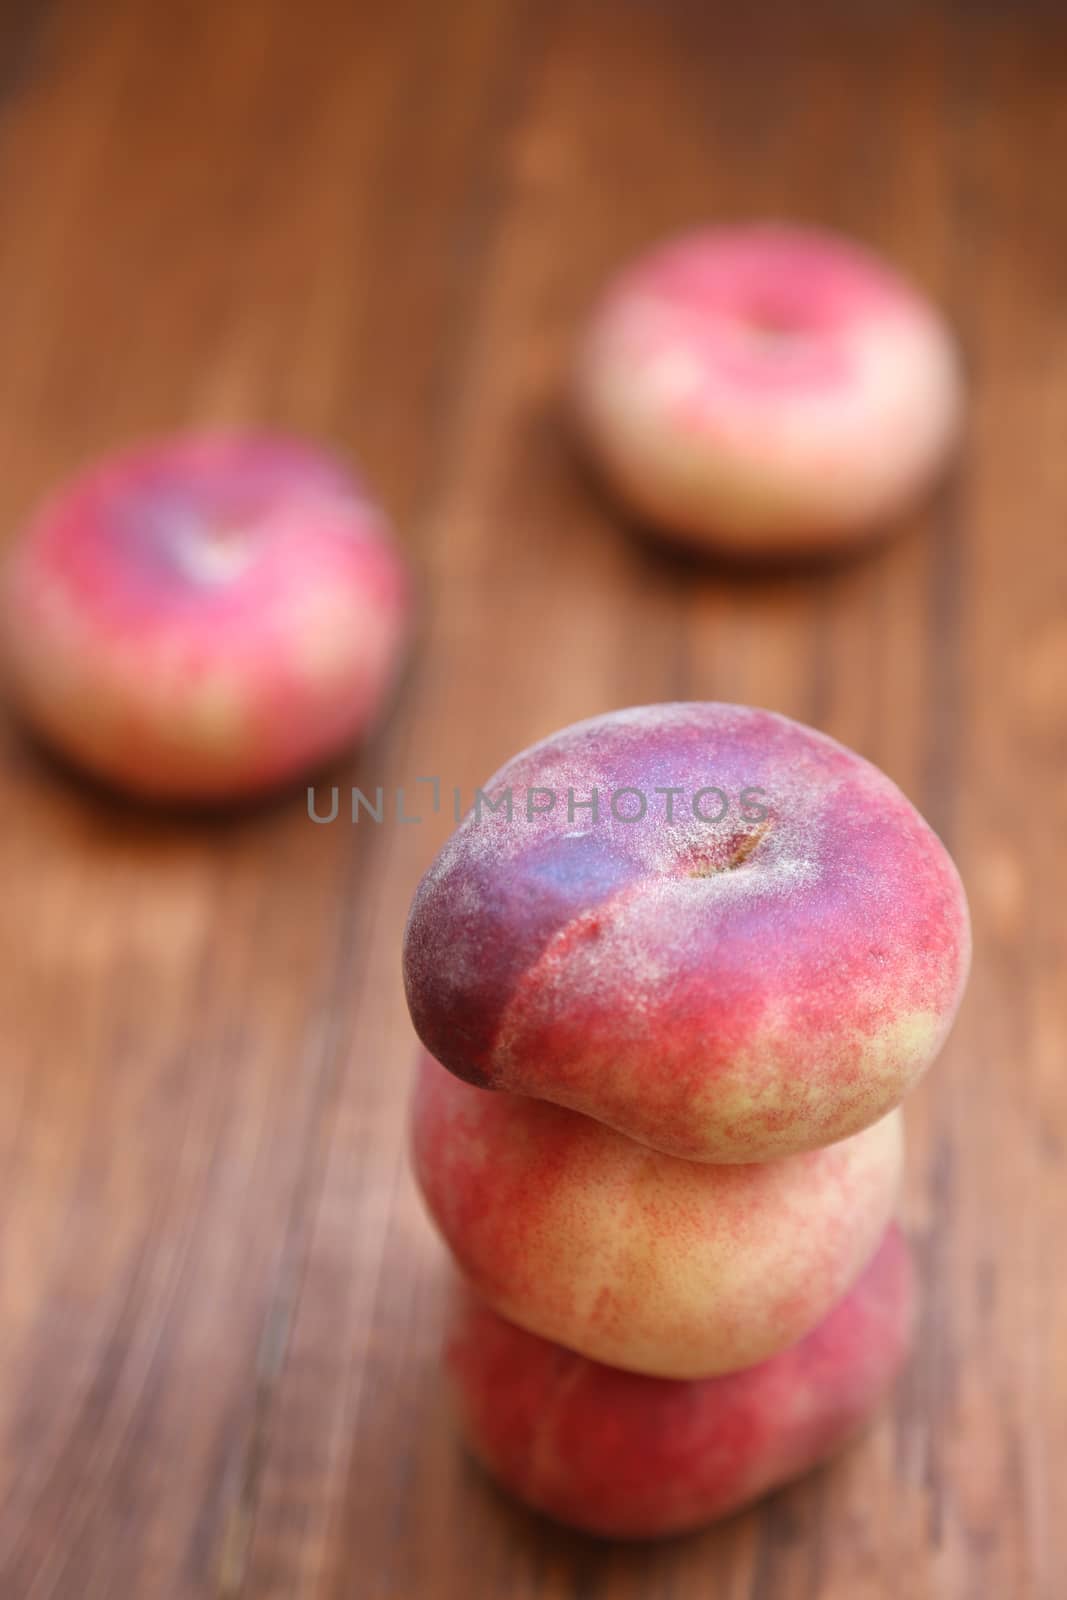 some fresh ripe  peaches on wooden background